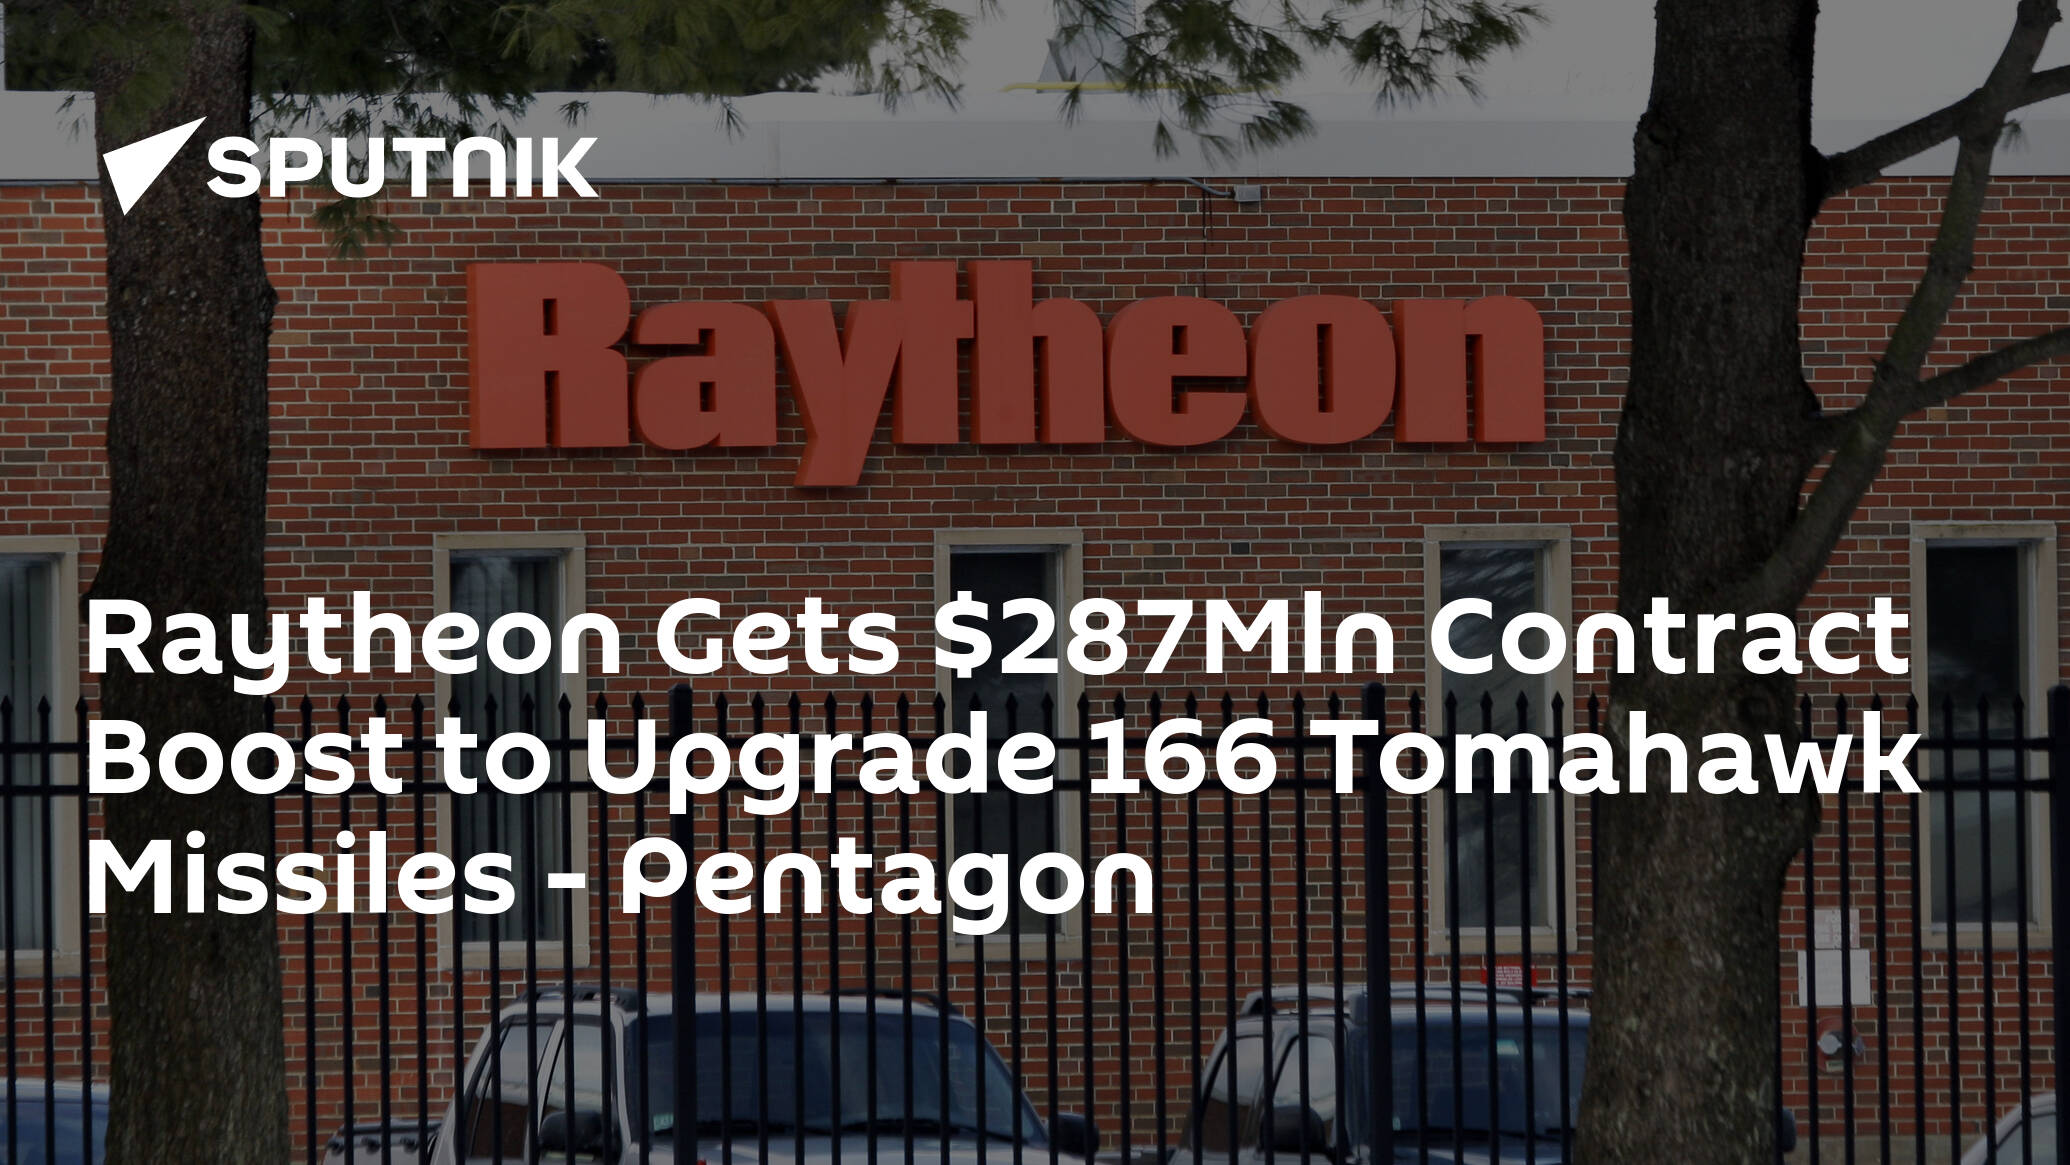 Raytheon Gets 287Mln Contract Boost to Upgrade 166 Tomahawk Missiles